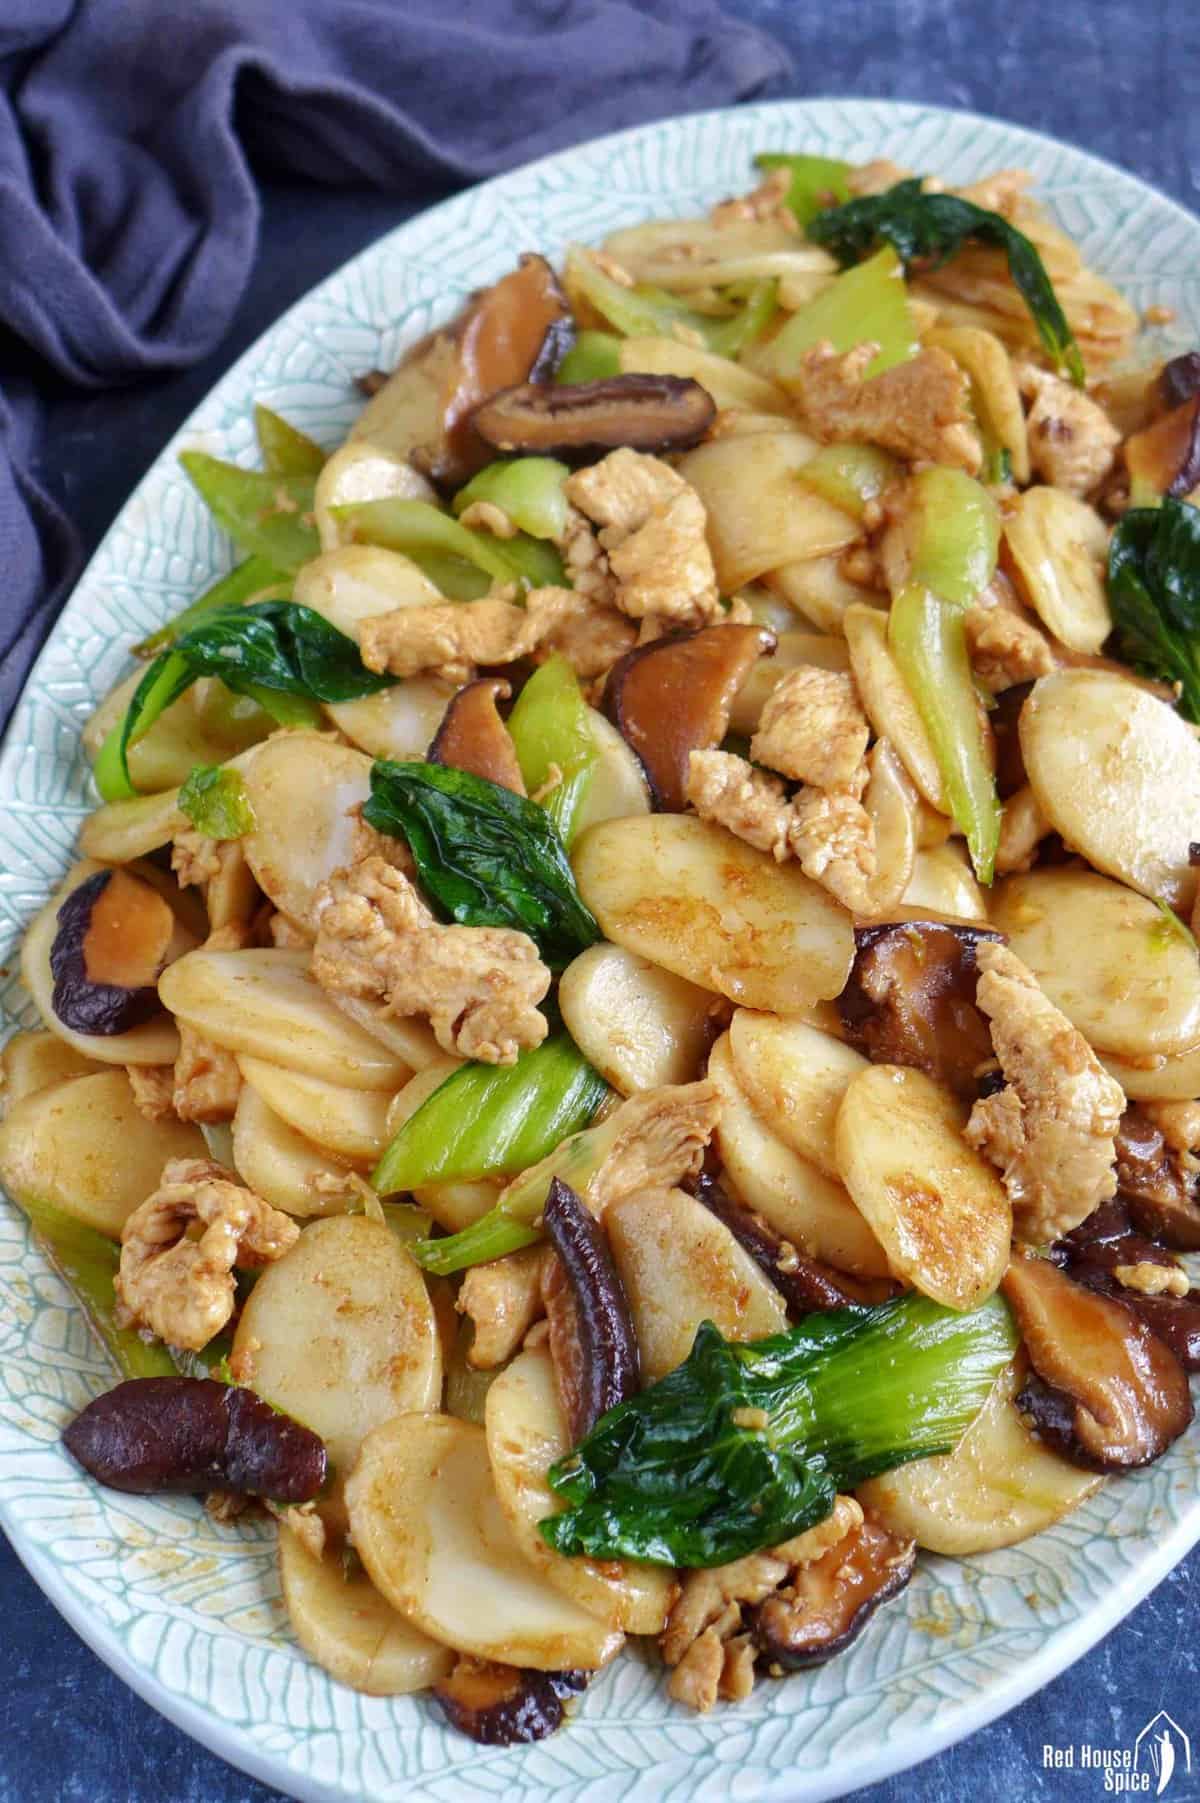 rice cakes stir-fried with chicken, mushrooms and Bok Choy.